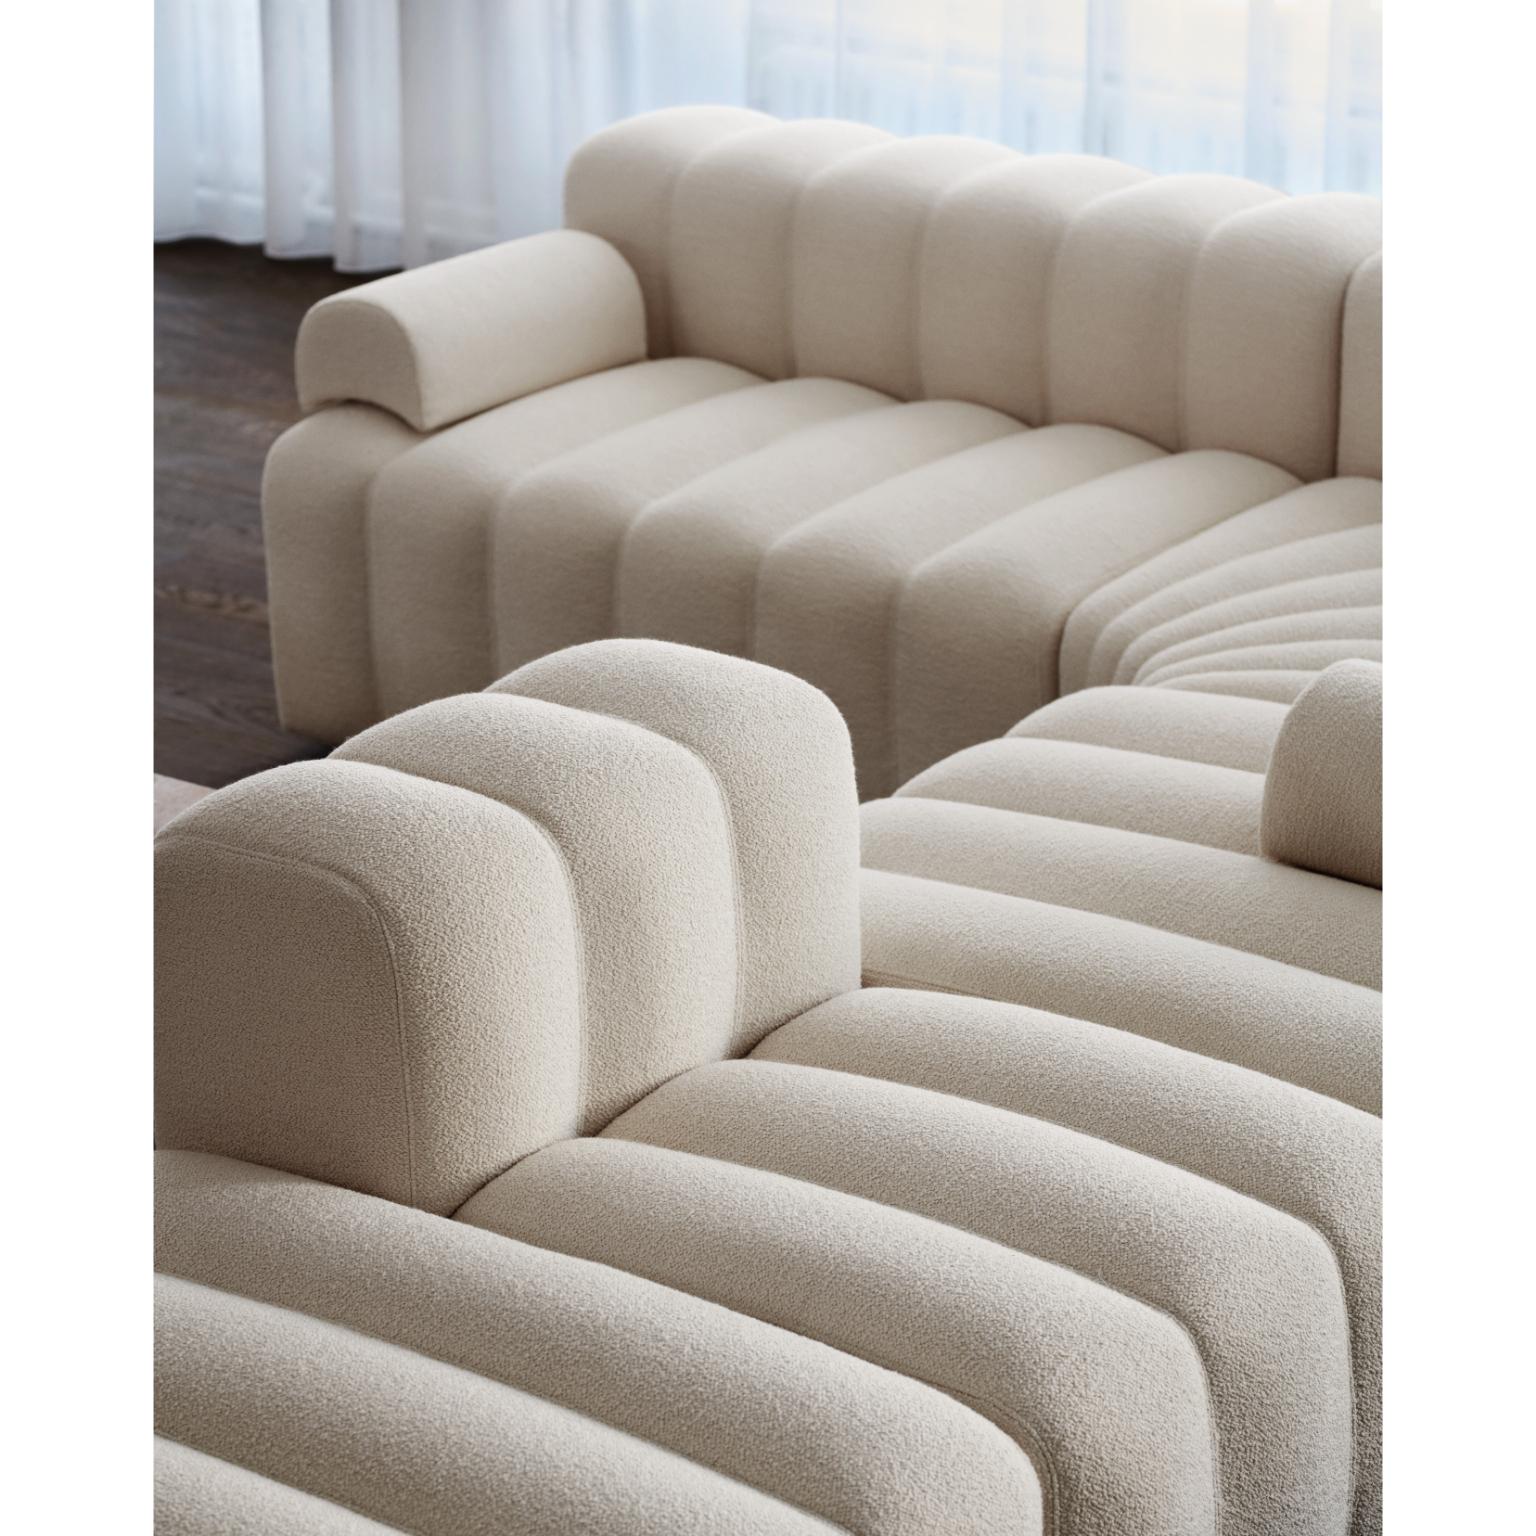 Studio Medium Right Modular Sofa With Armrest by NORR11
Dimensions: D 96 x W 113 x H 70 cm. SH 47 cm. 
Materials: Foam, wood and upholstery.
Upholstery: Barnum Boucle Color 3.

Available in different upholstery options. A plywood structure with